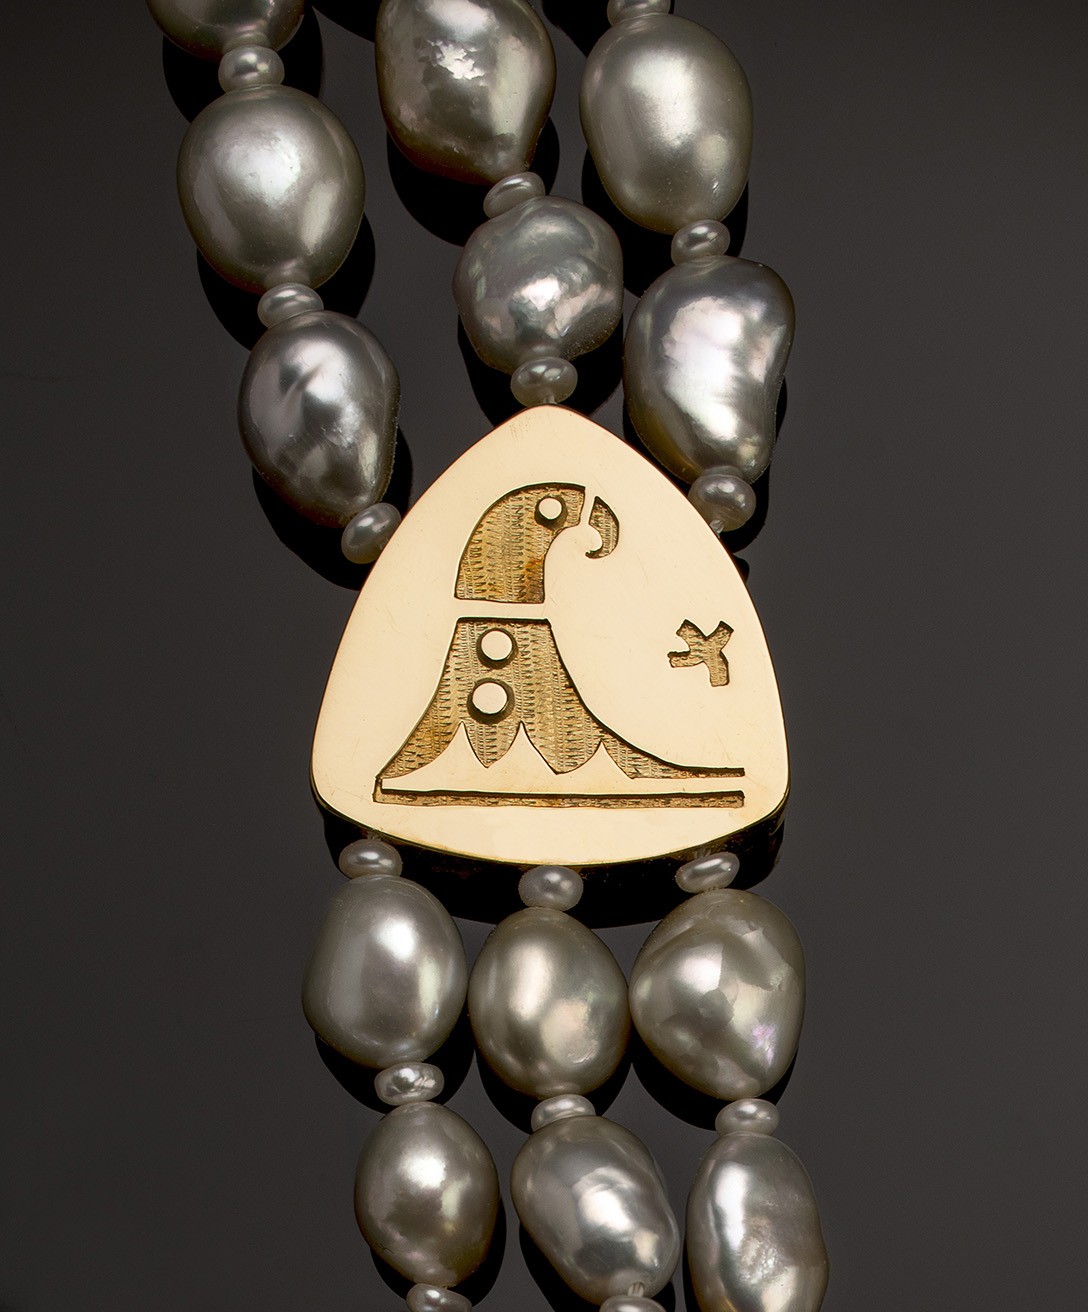 A necklace with a pendant and pearls.